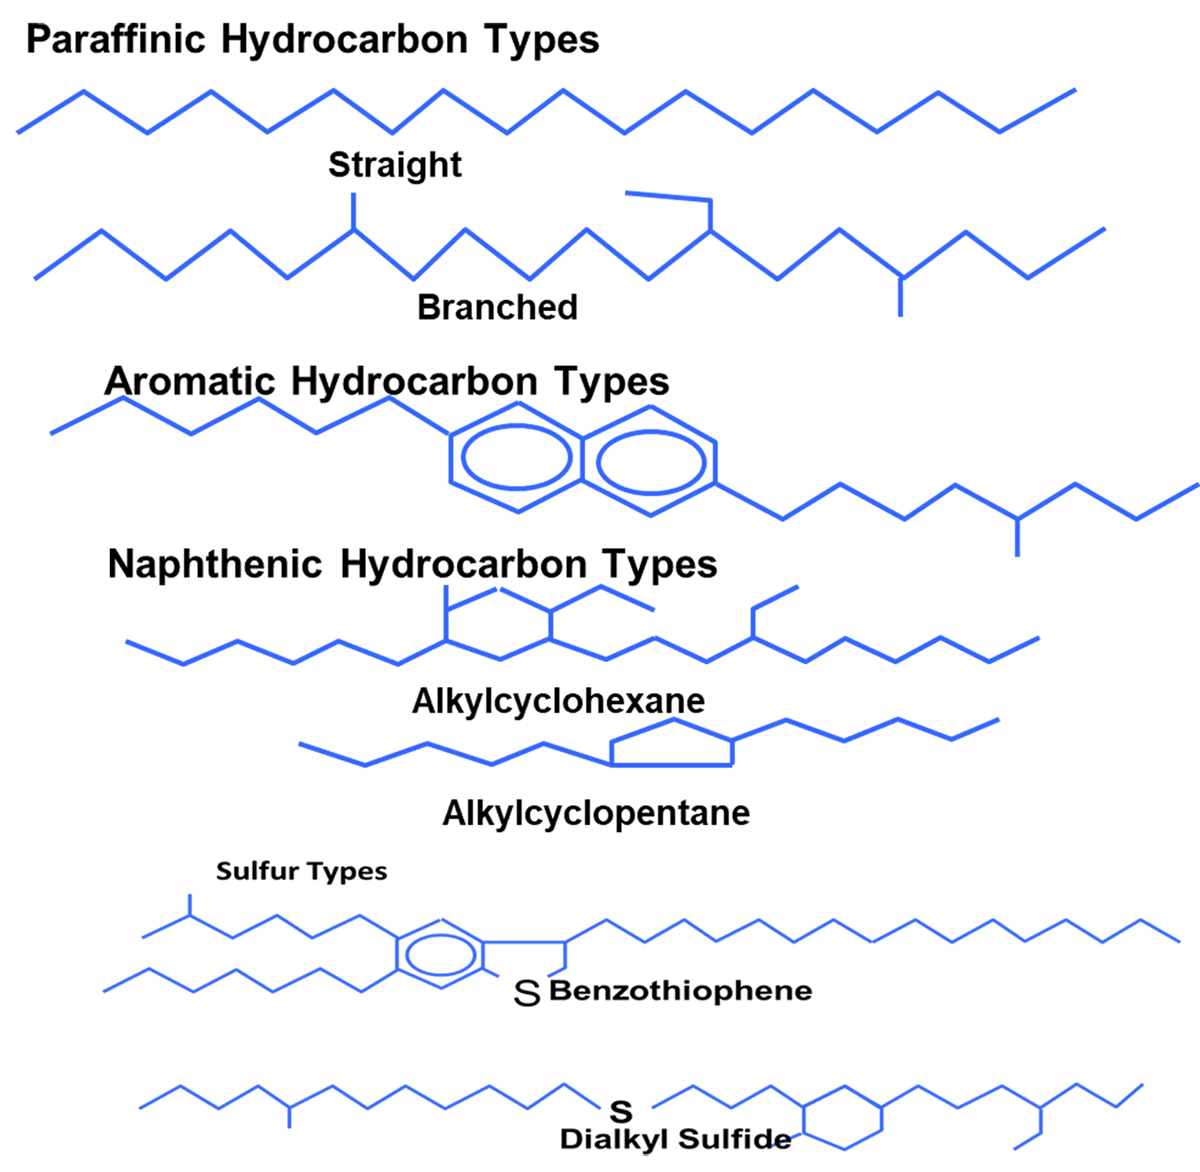 Fig 1: Paraffinic hydrocarbon types